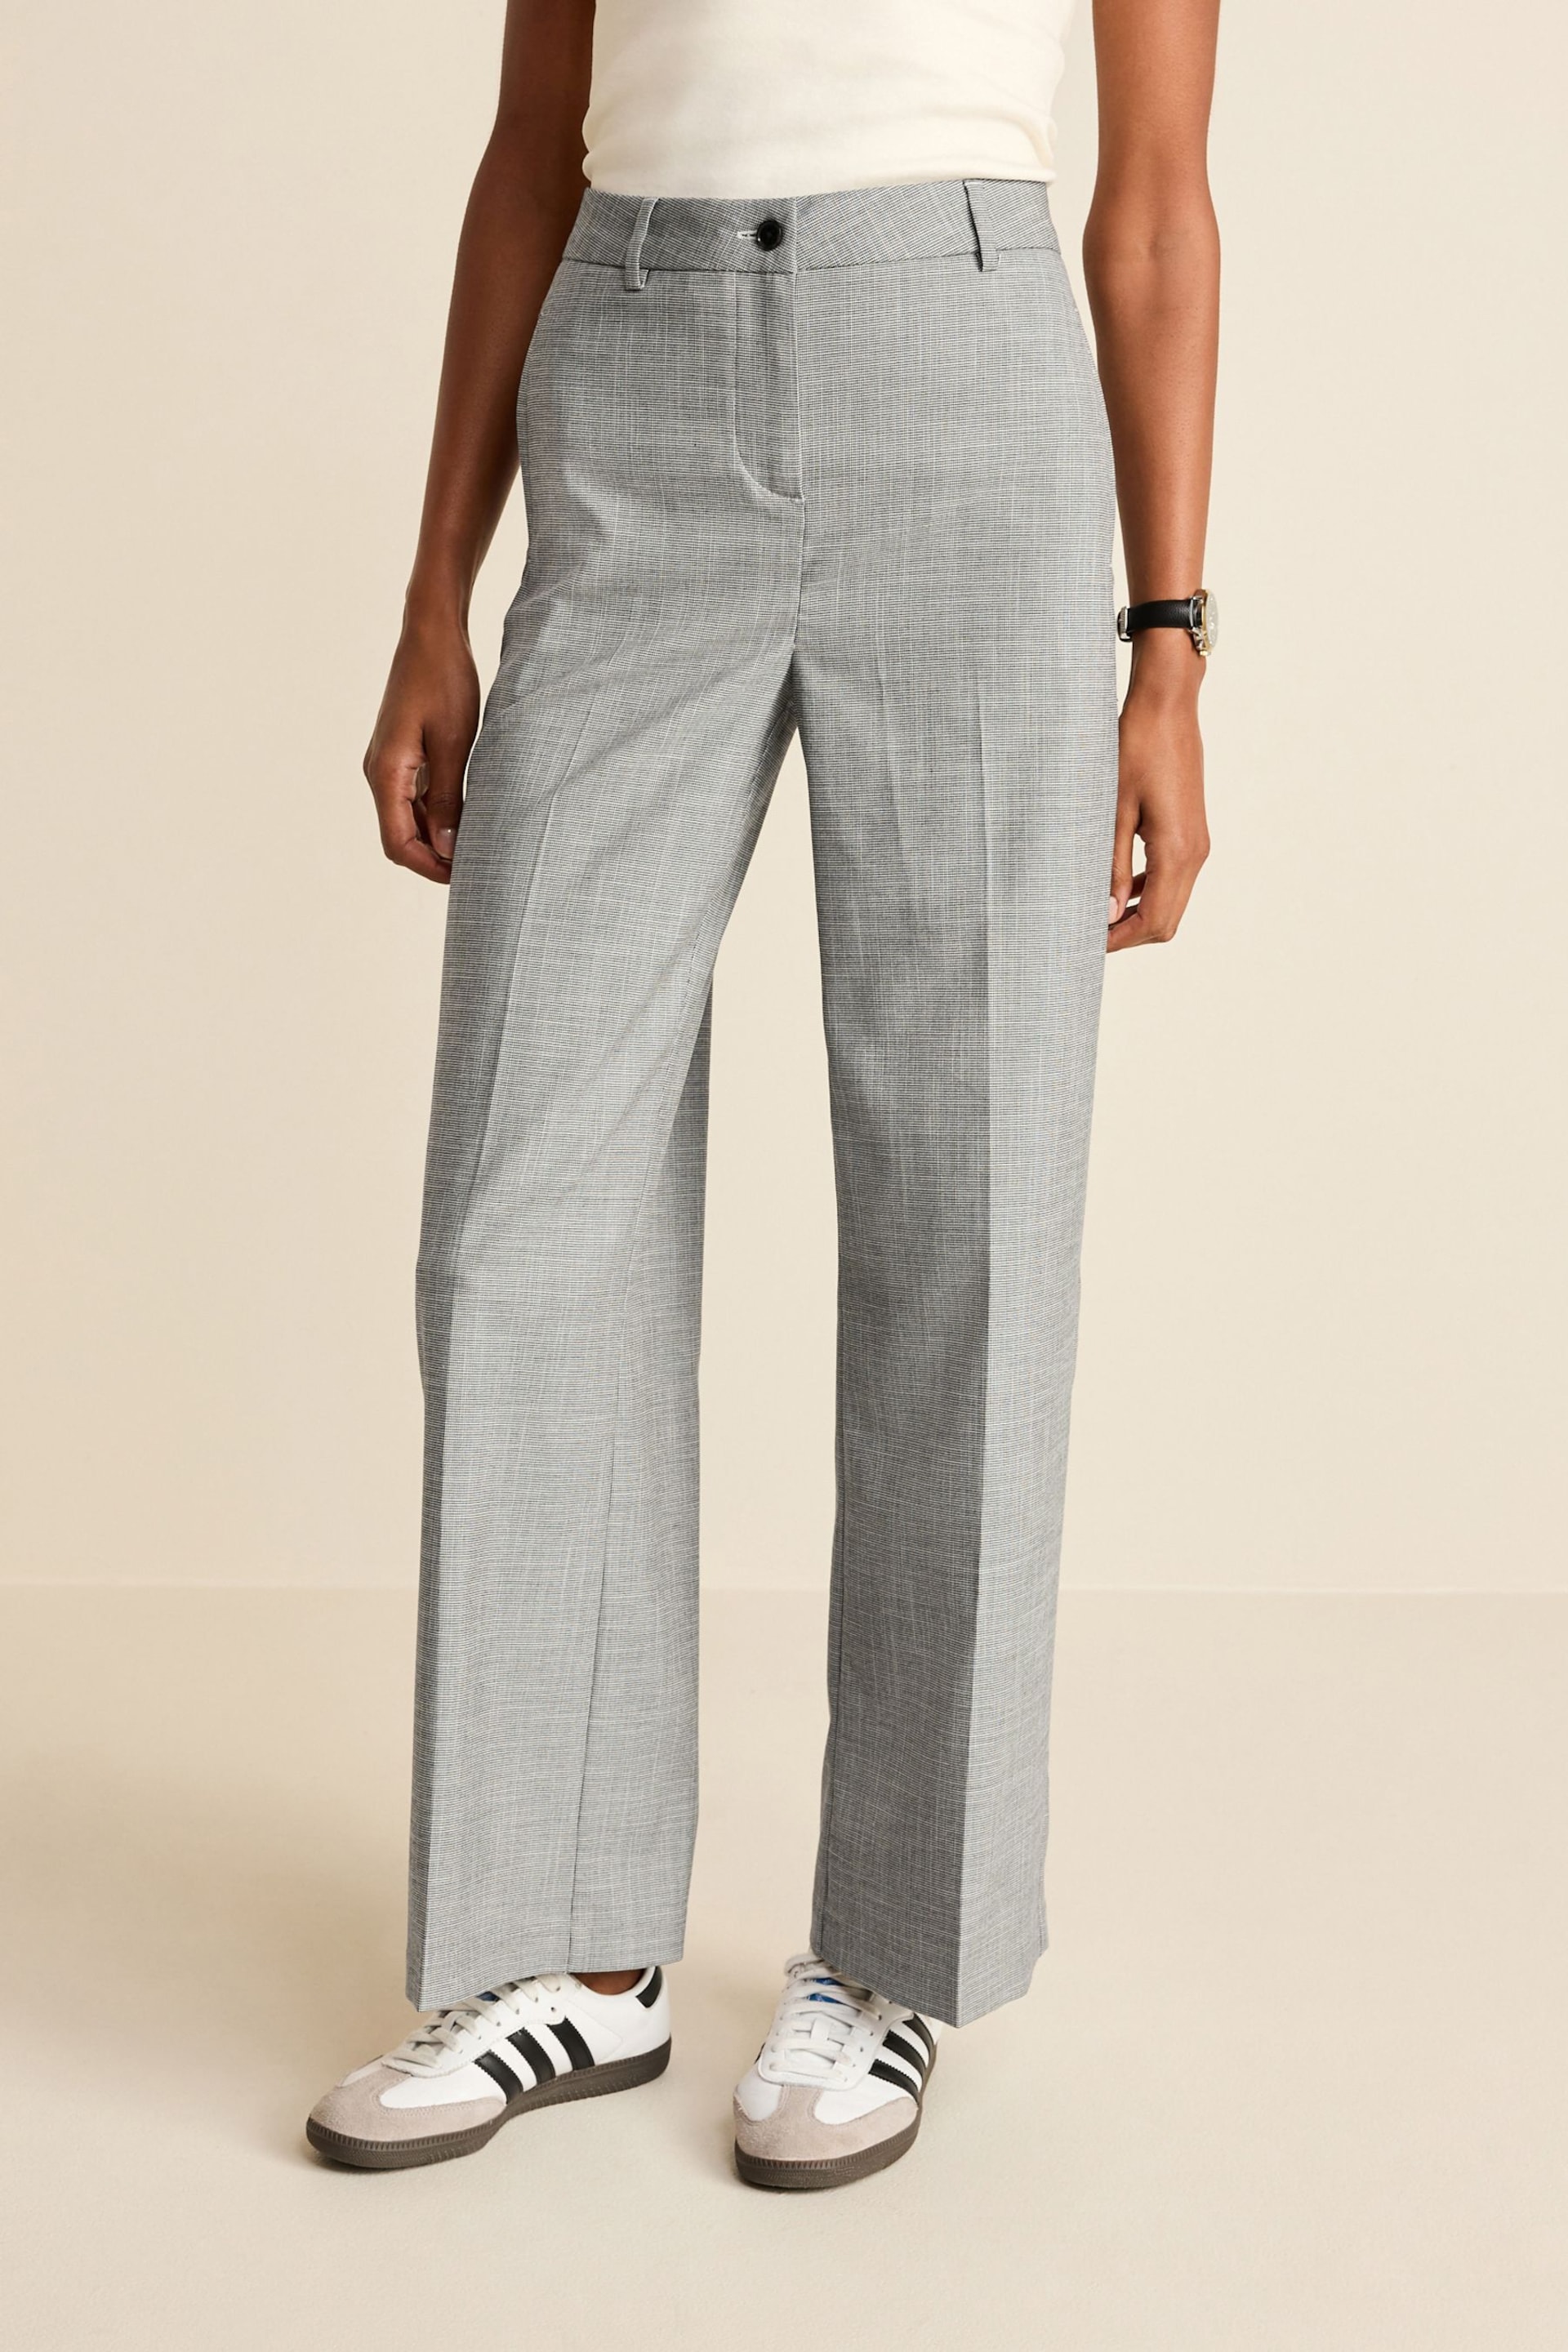 Black/White Check Tailored Check Wide Leg Trousers - Image 3 of 7